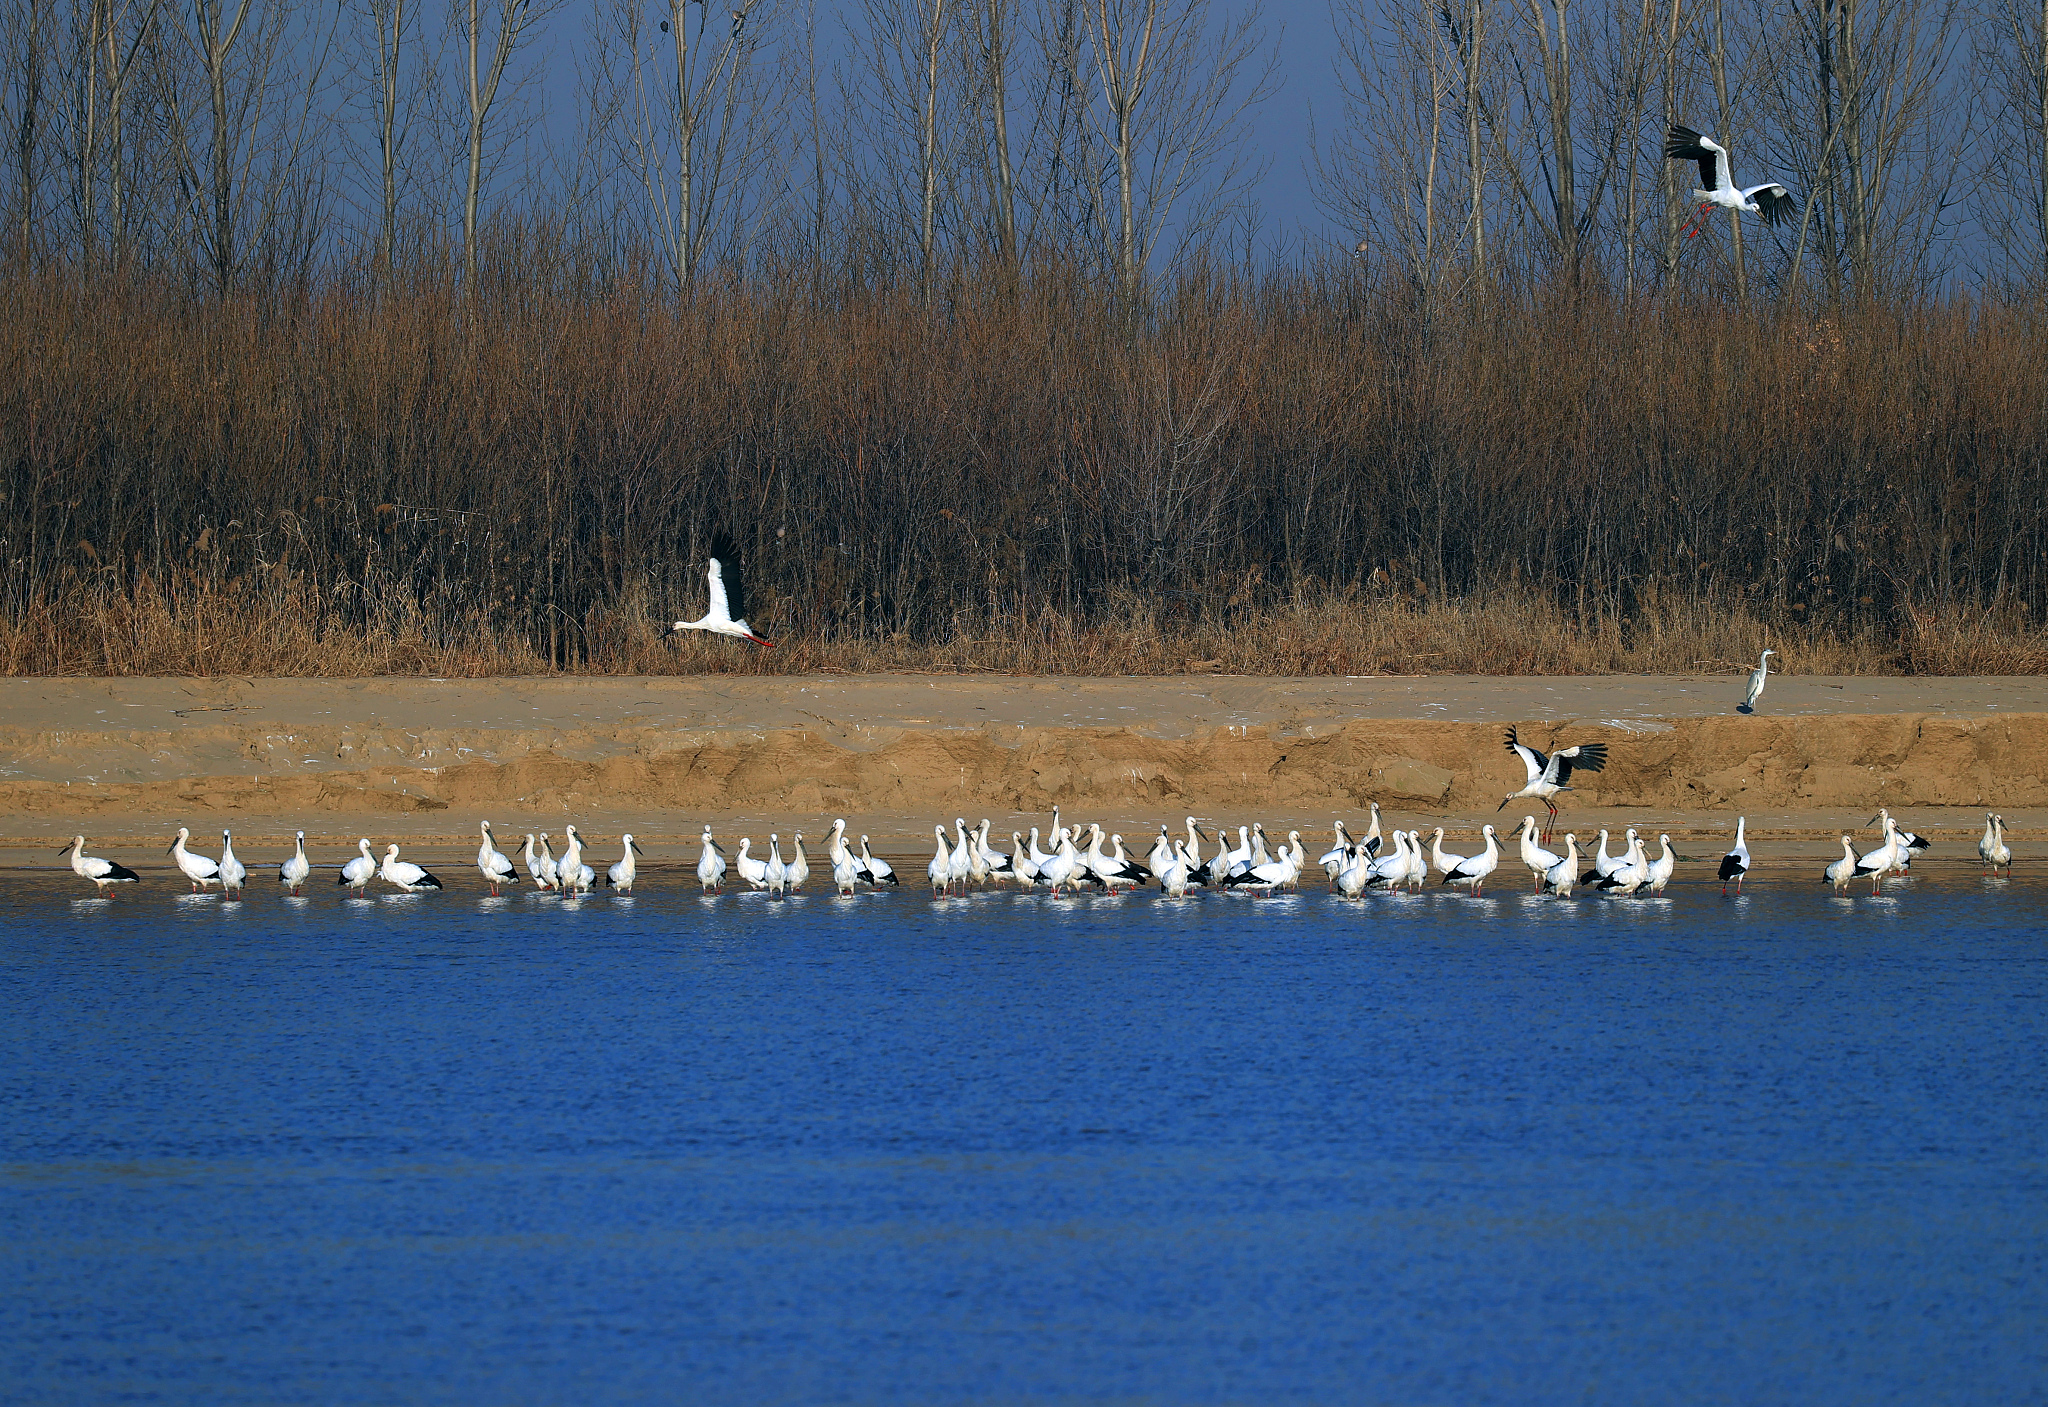 A file photo shows migratory birds in the sanctuary at the mouth of the Yellow River in Dongying, Shandong Province. /CFP